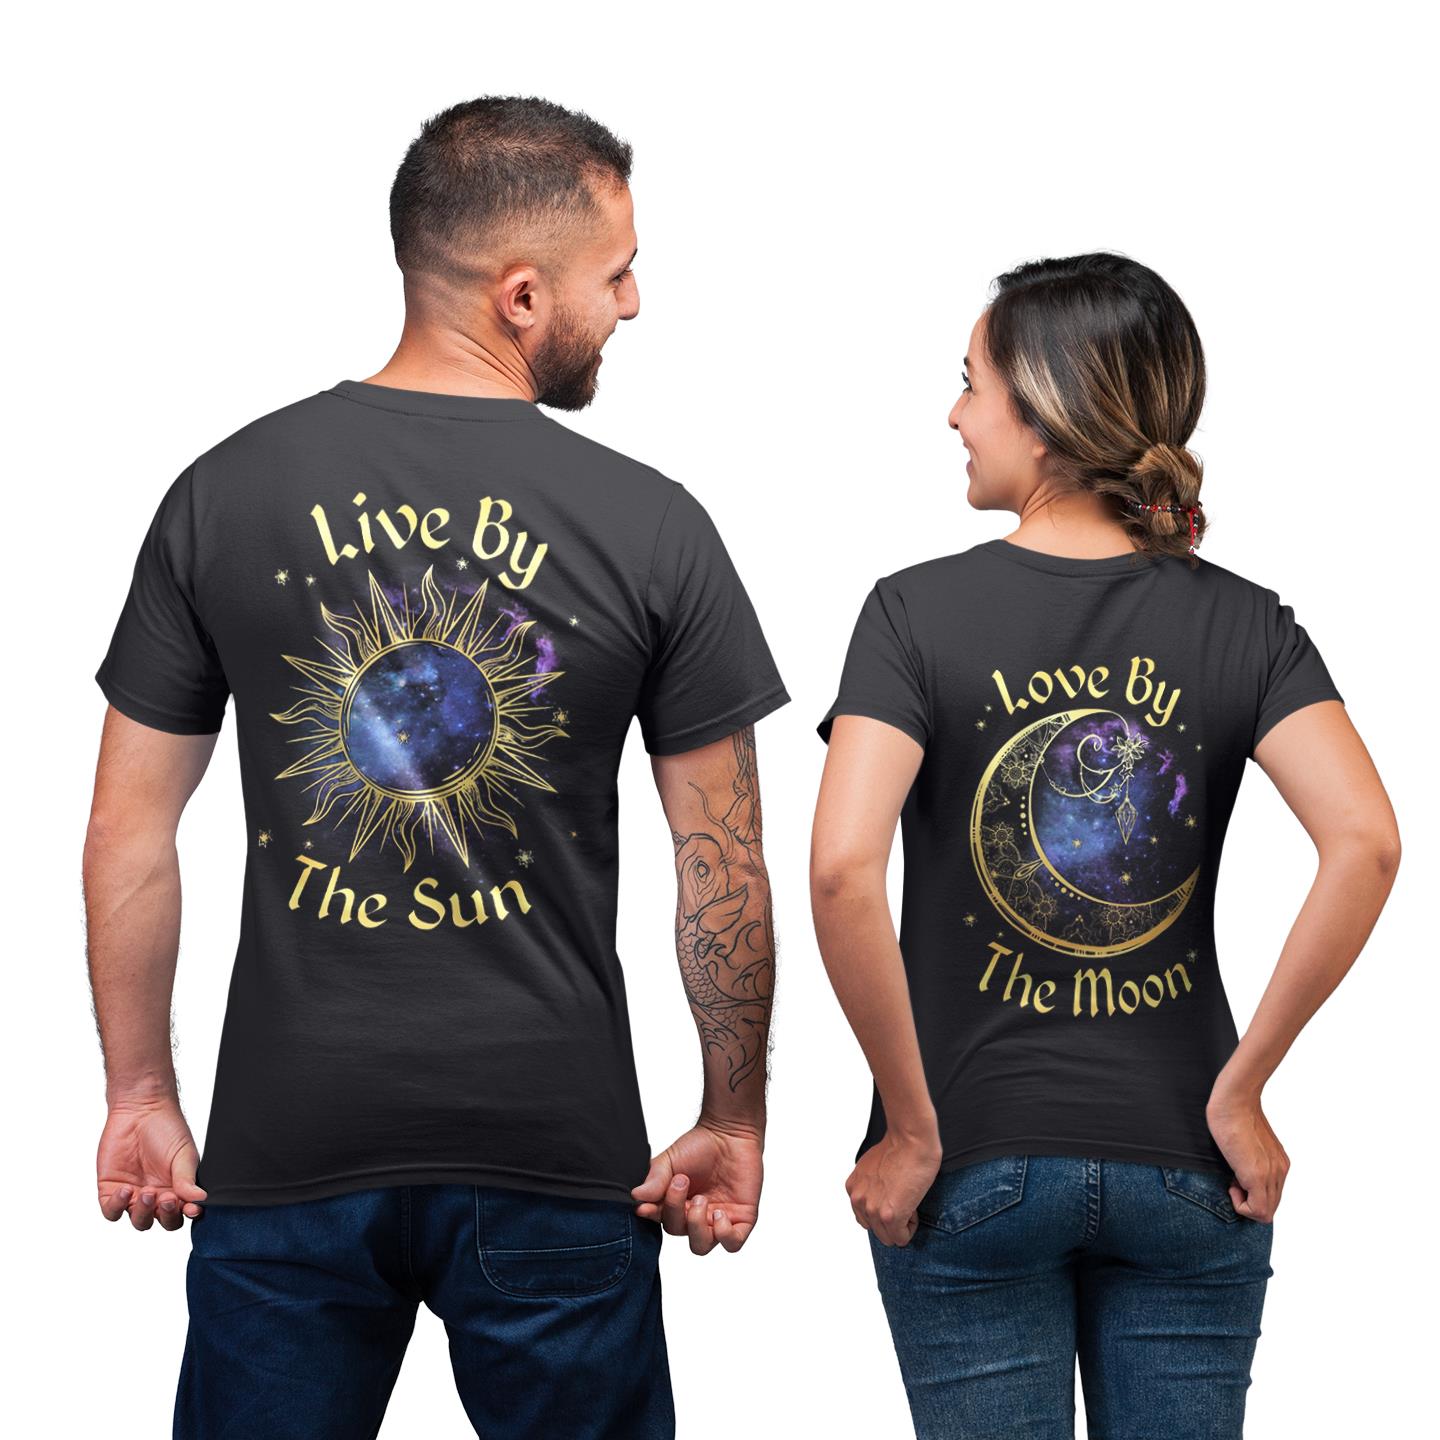 Live By The Sun Matching Love By The Moon For Couple For His And Her For Husband And Wife Gift T- Shirt